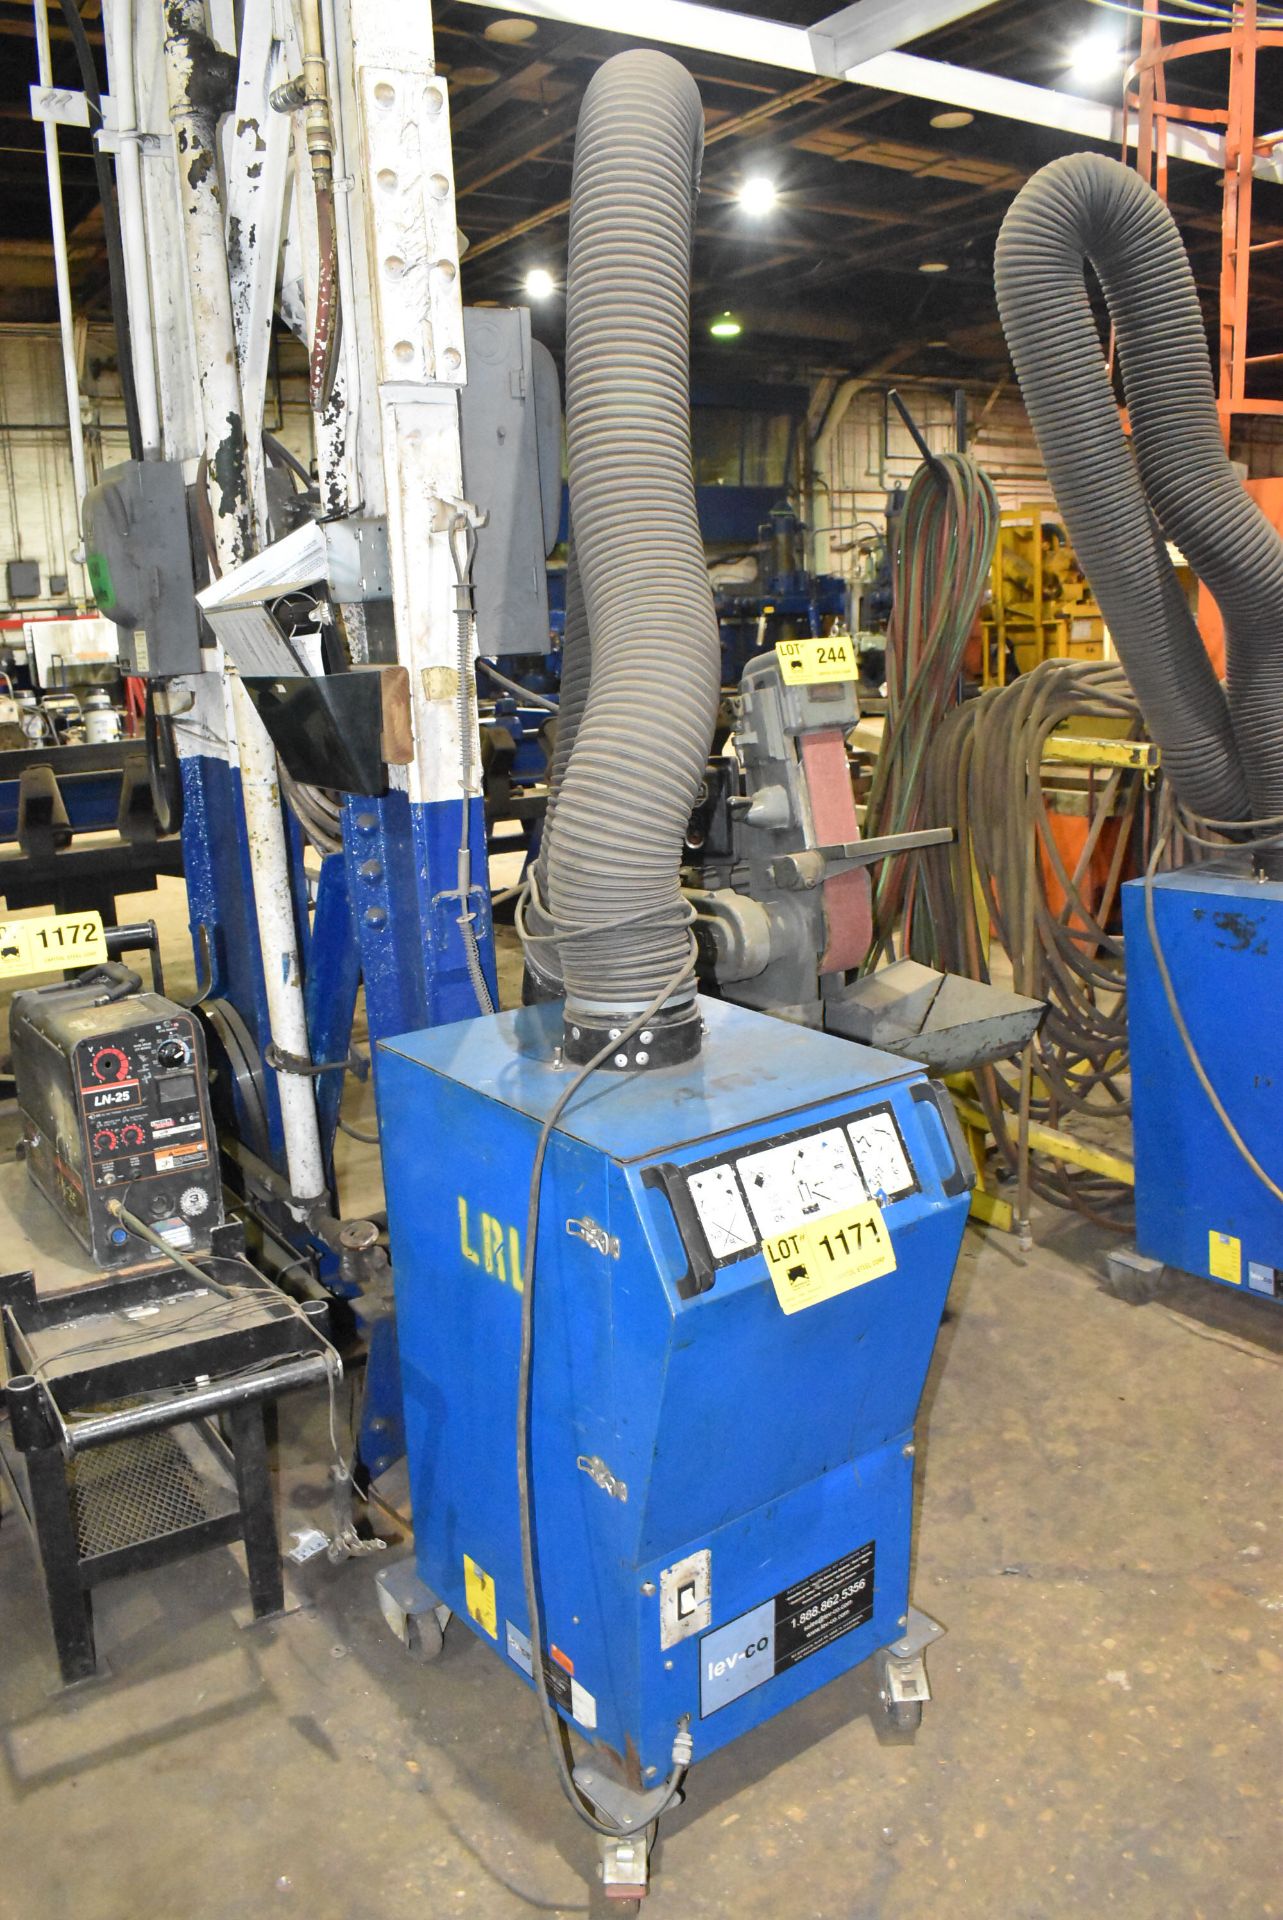 LEV-CO PORTABLE WELDING FUME EXTRACTOR WITH OVERHEAD SNORKEL-TYPE EXTRACTION ARM, S/N: N/A [ - Image 2 of 3